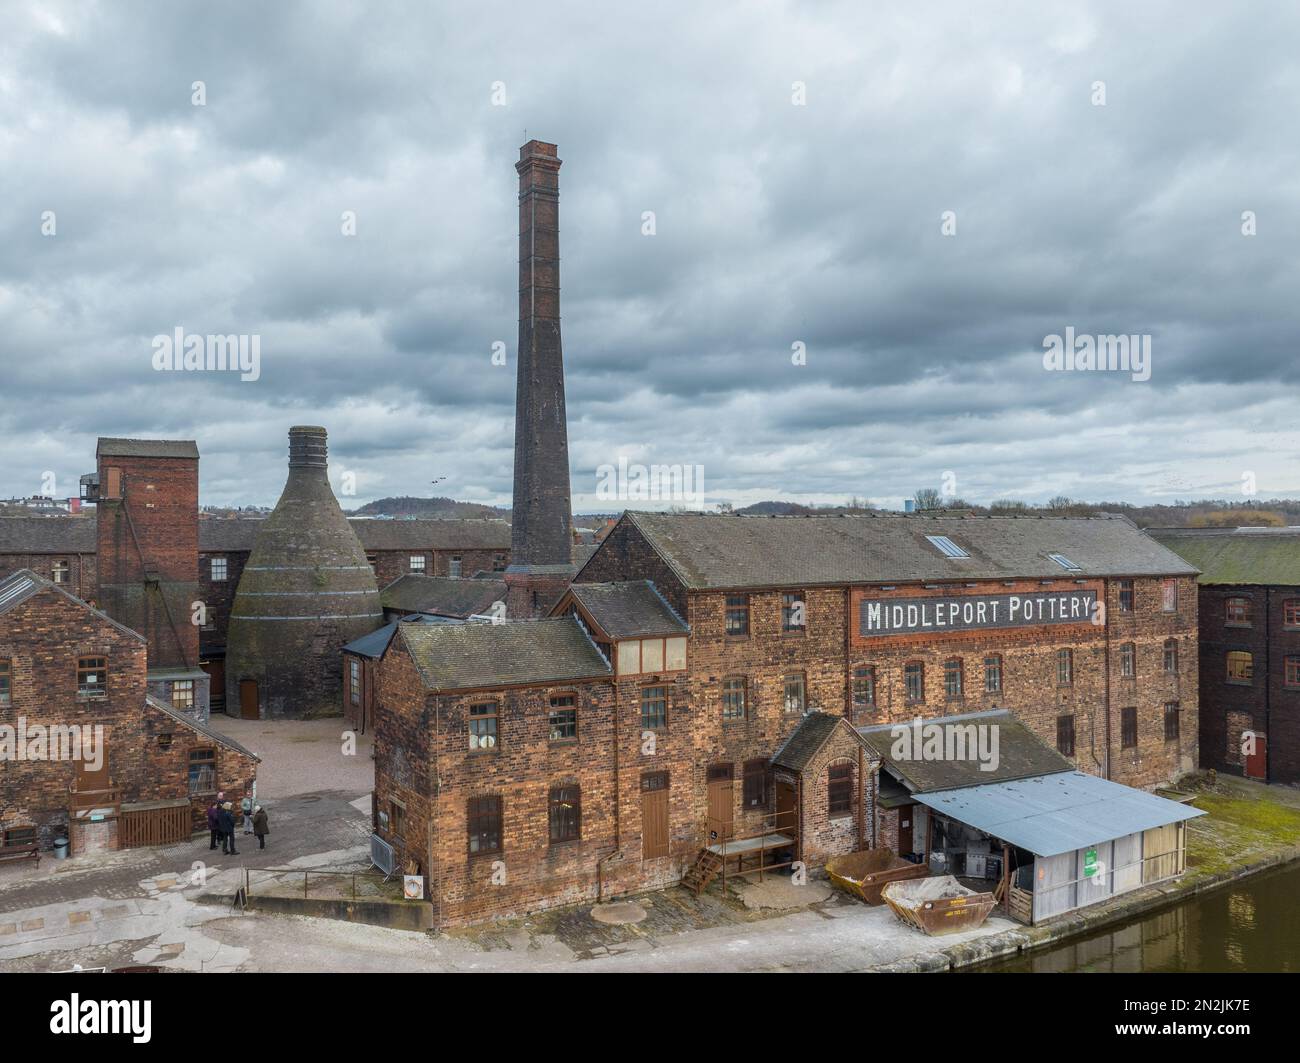 Pottery Stoke On Trent Staffordshire. Bottle Kilns and chimneys at Middleport pottery. Aerial view of historic pottery next to Mersey and Trent canal Stock Photo